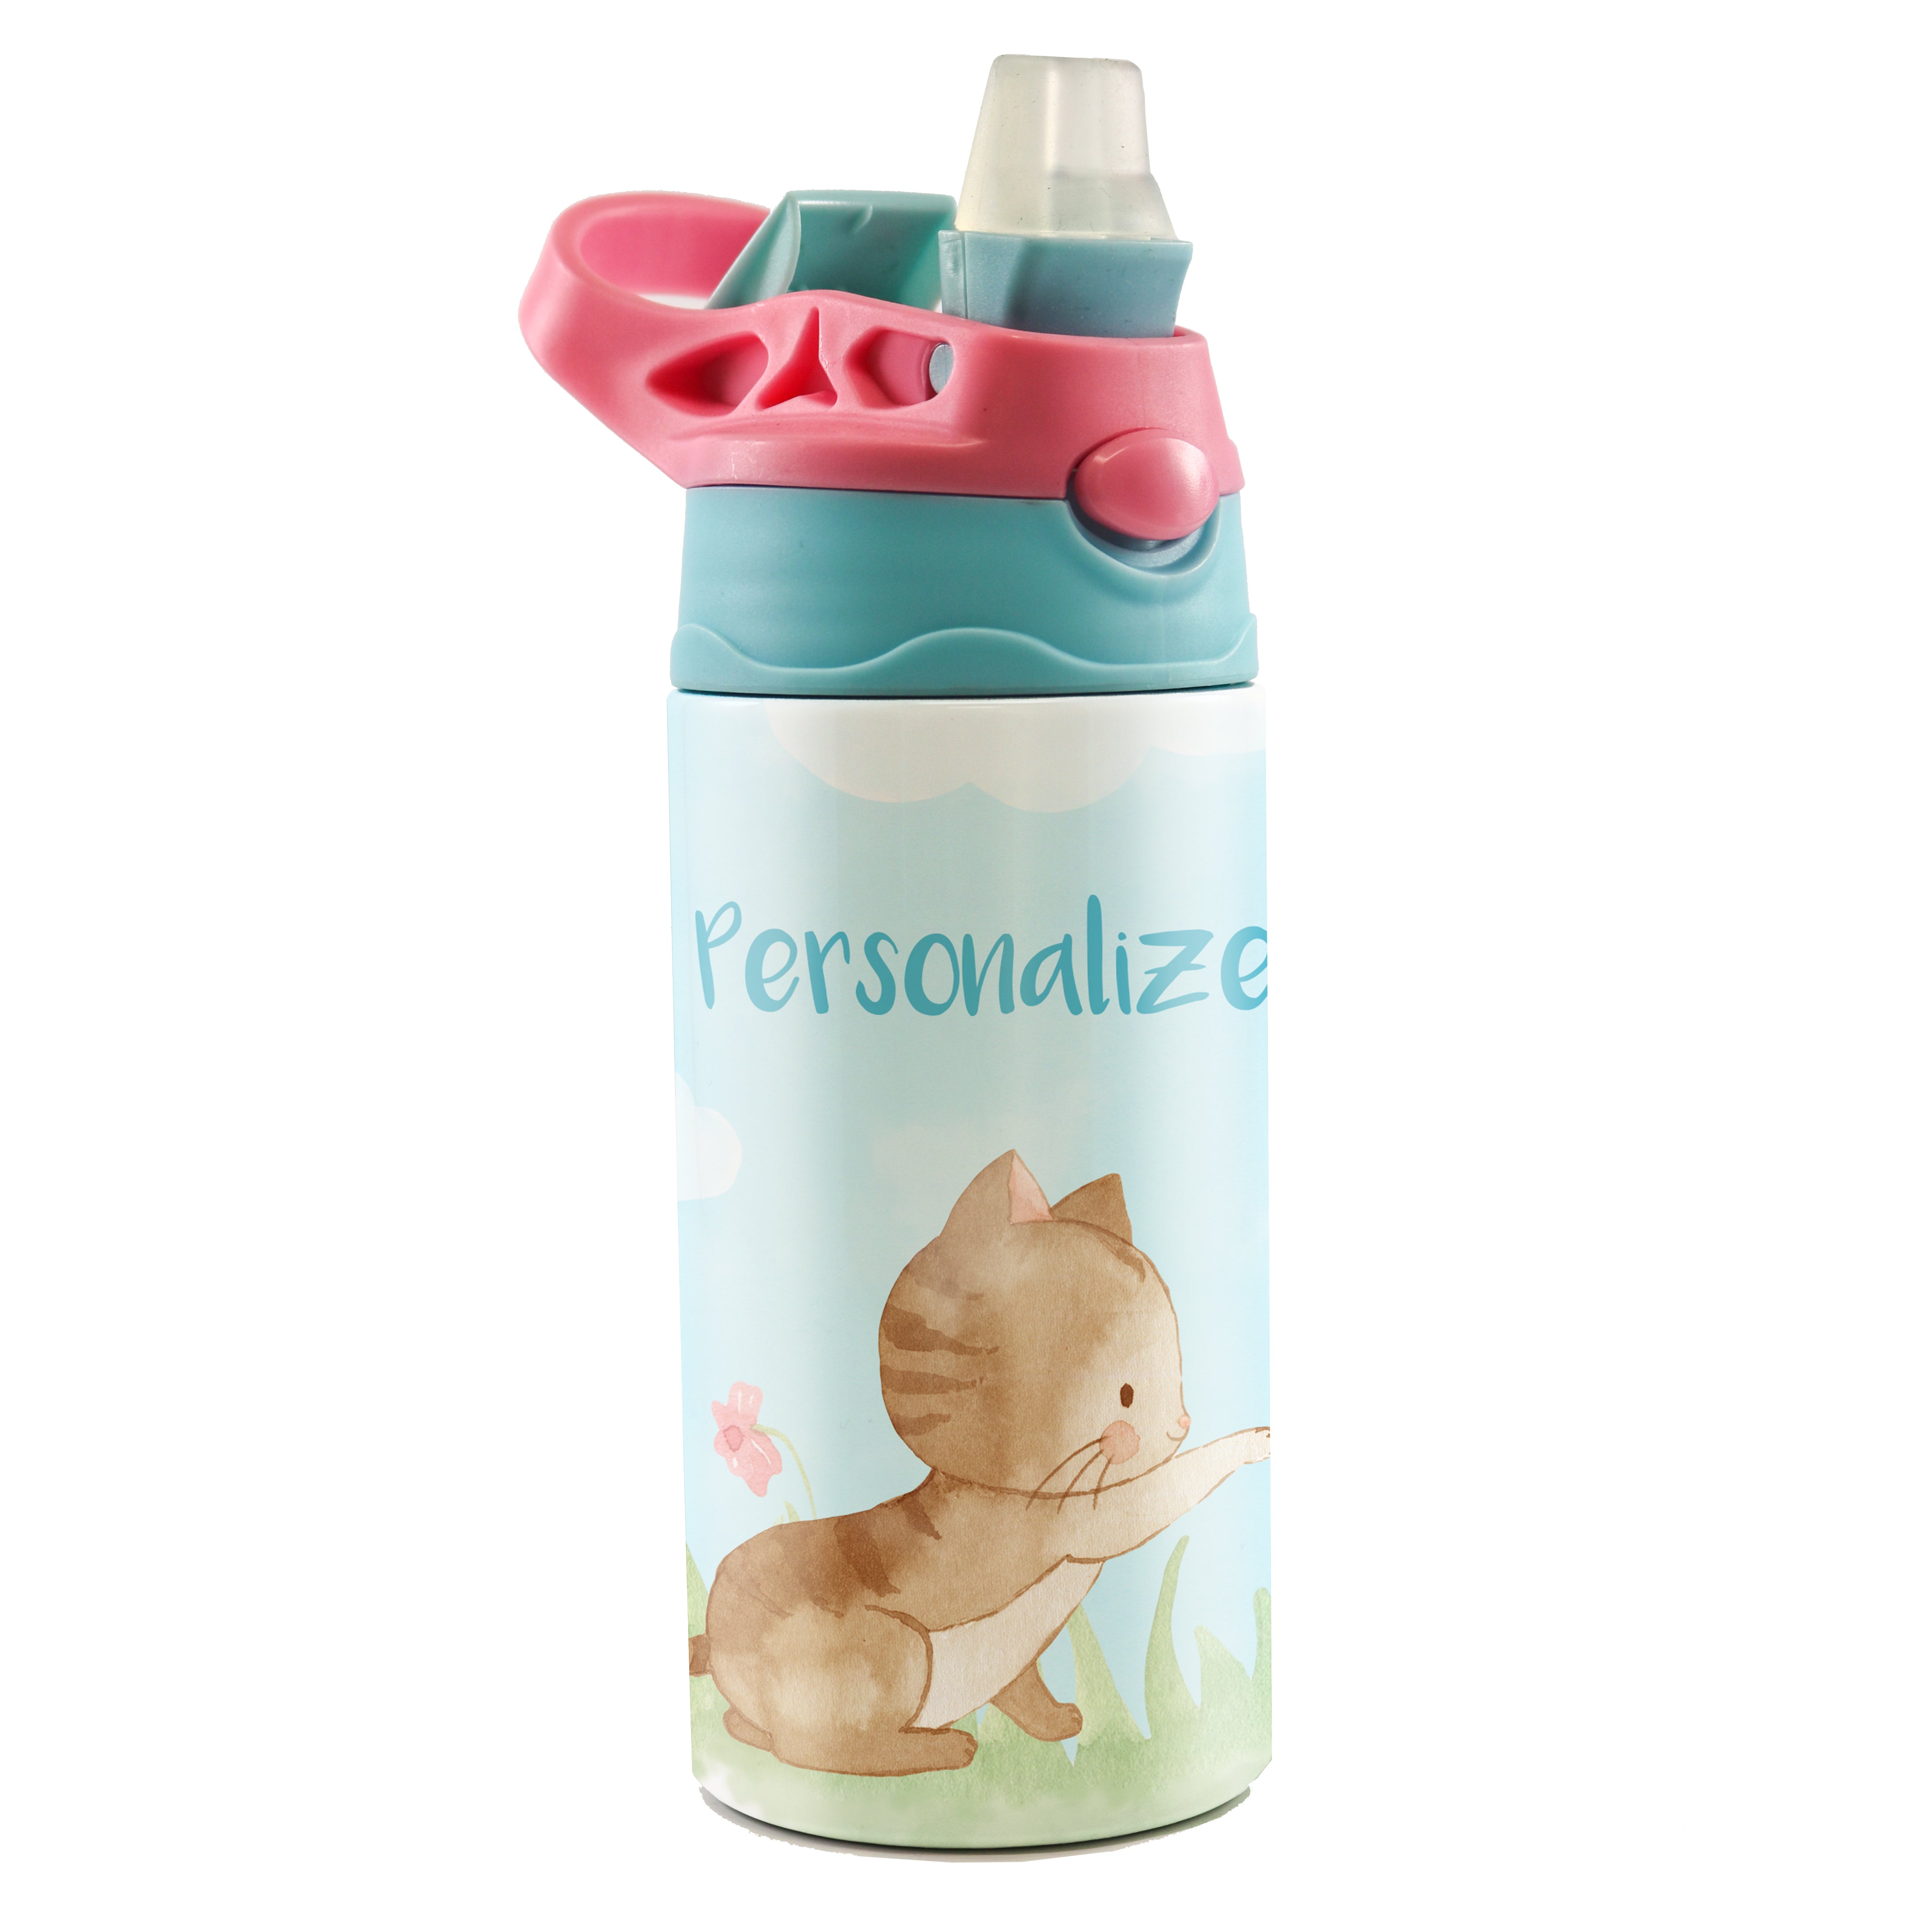 Trend Setters Original (Kitty Cat - Personalize with Name) 12 oz Stainless Steel Water Bottle with Pink and Blue Lid